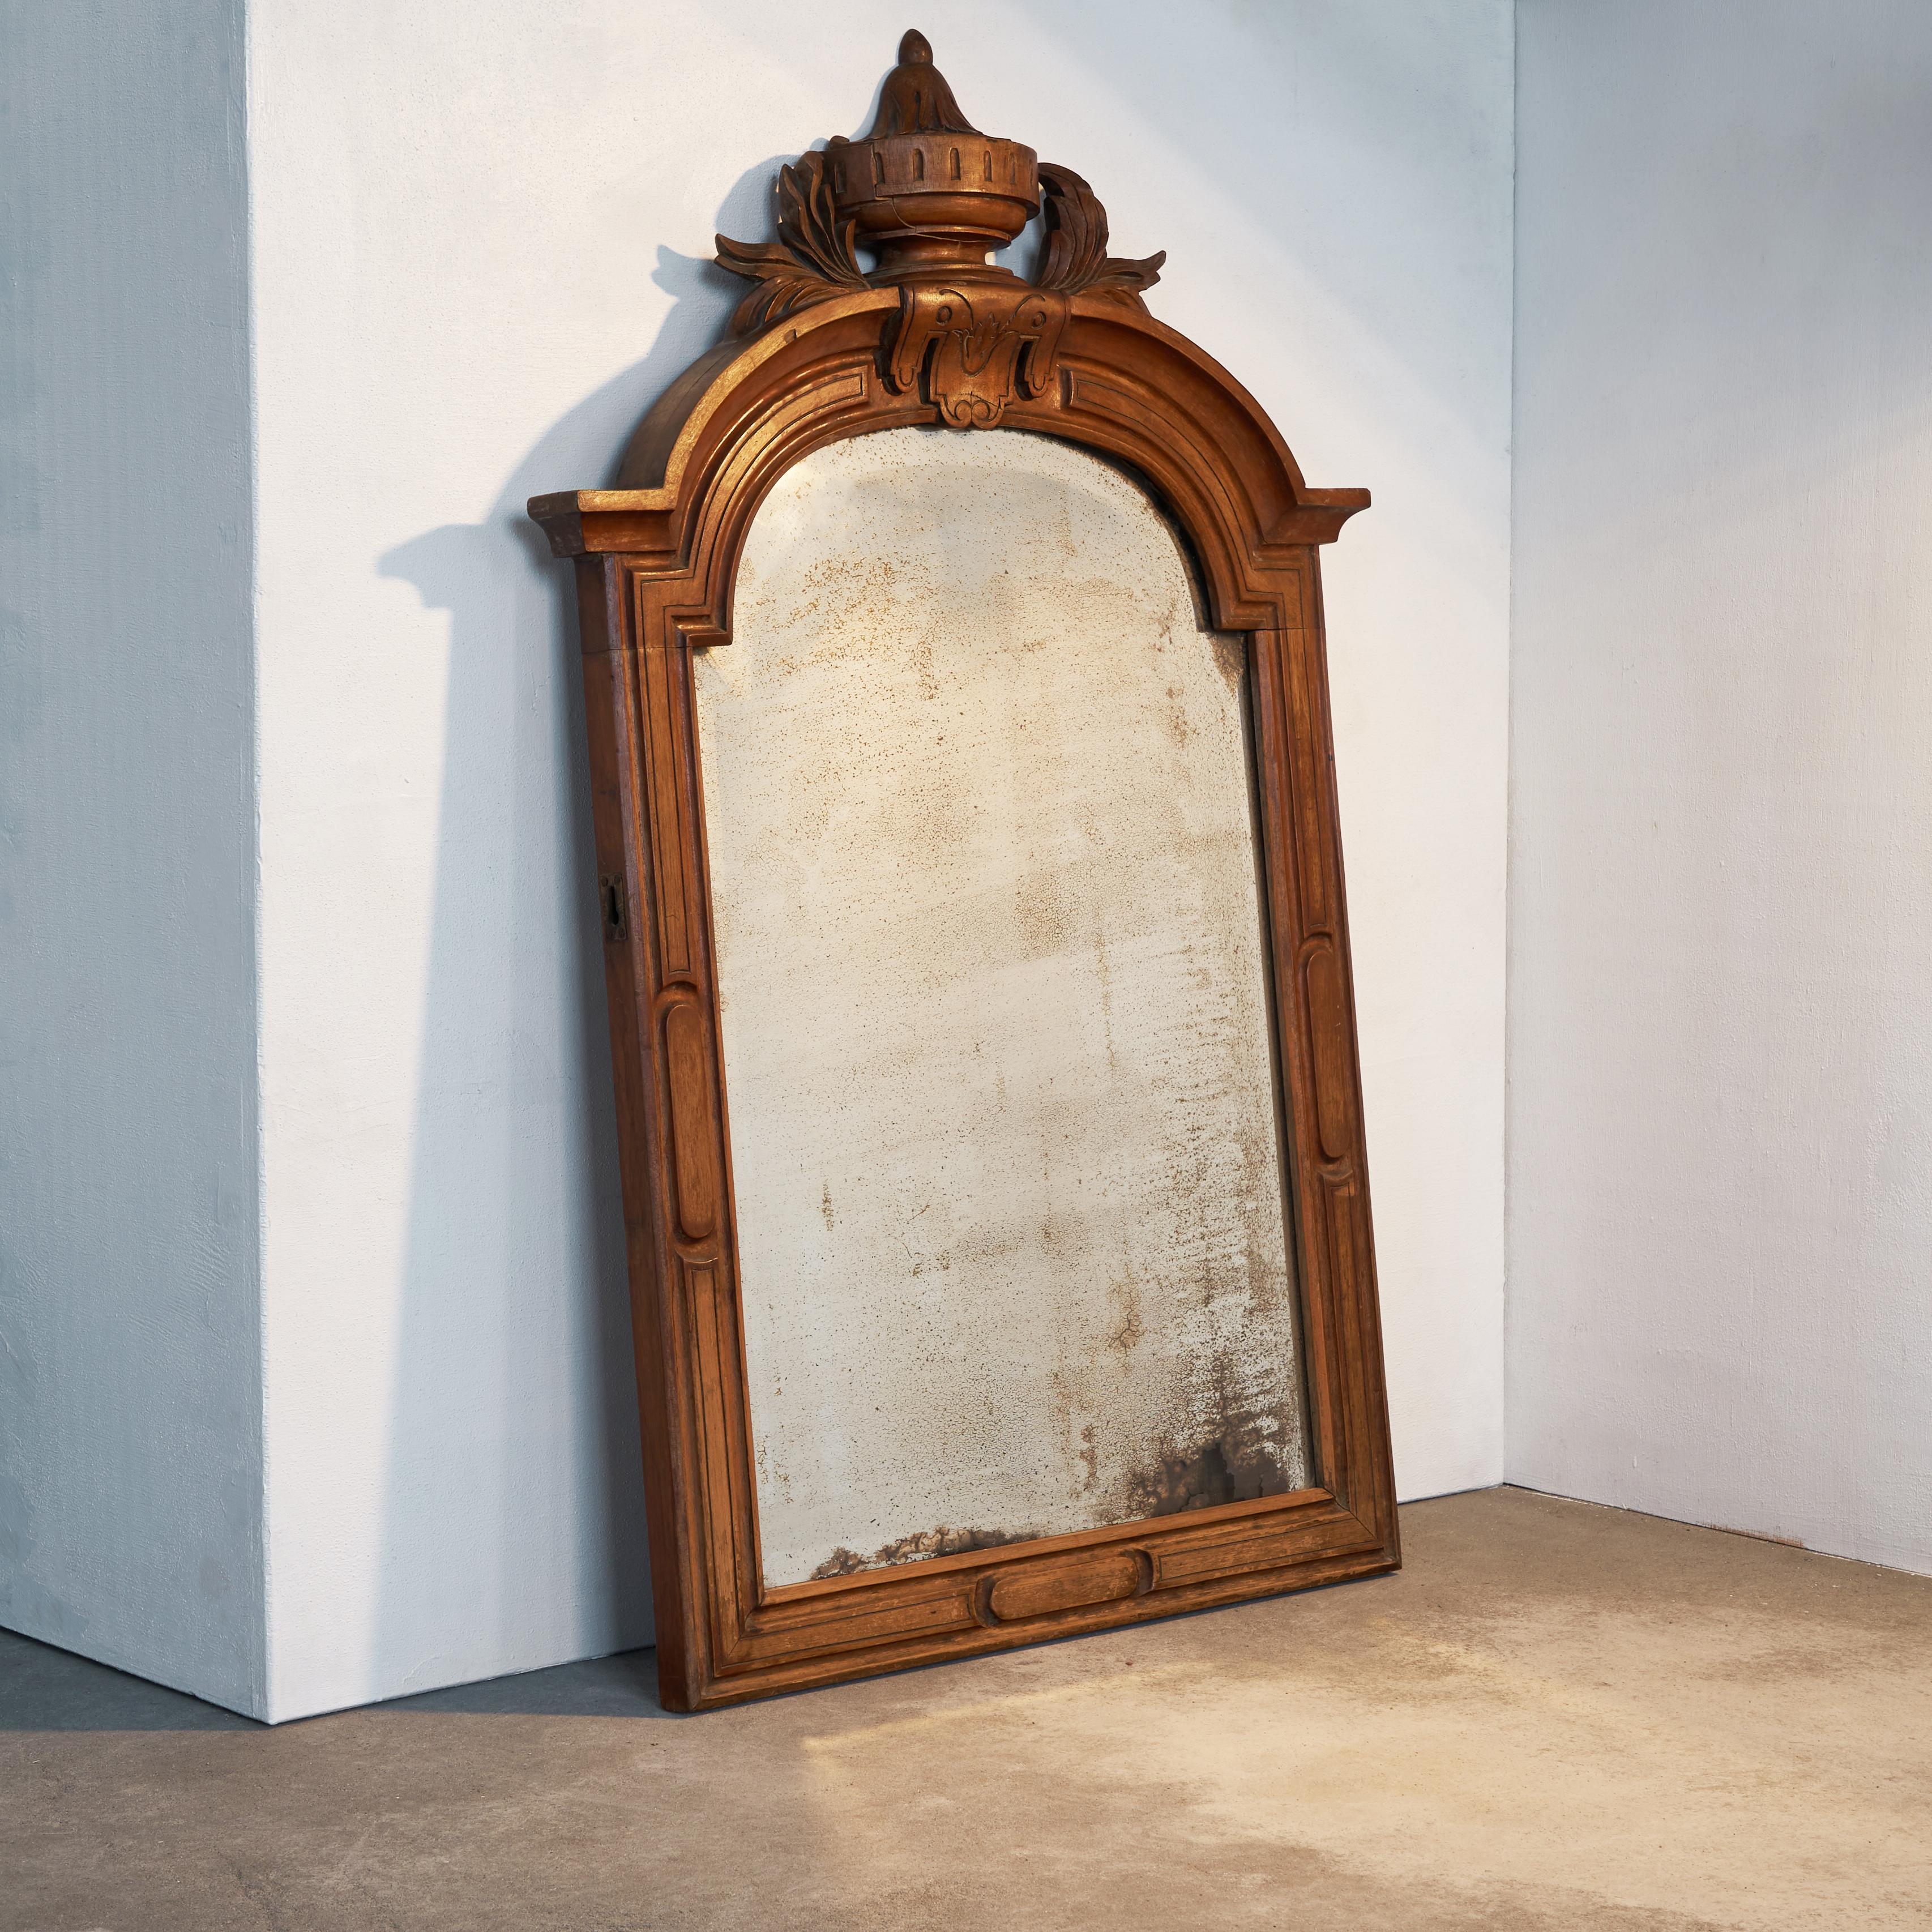 Patinated mirror in carved mahogany frame, late 19th century.

This is a very decorative mirror in a beautifully carved frame in mahogany. The stylish decoration is classic but not over the top. The most special part of this mirror is without a